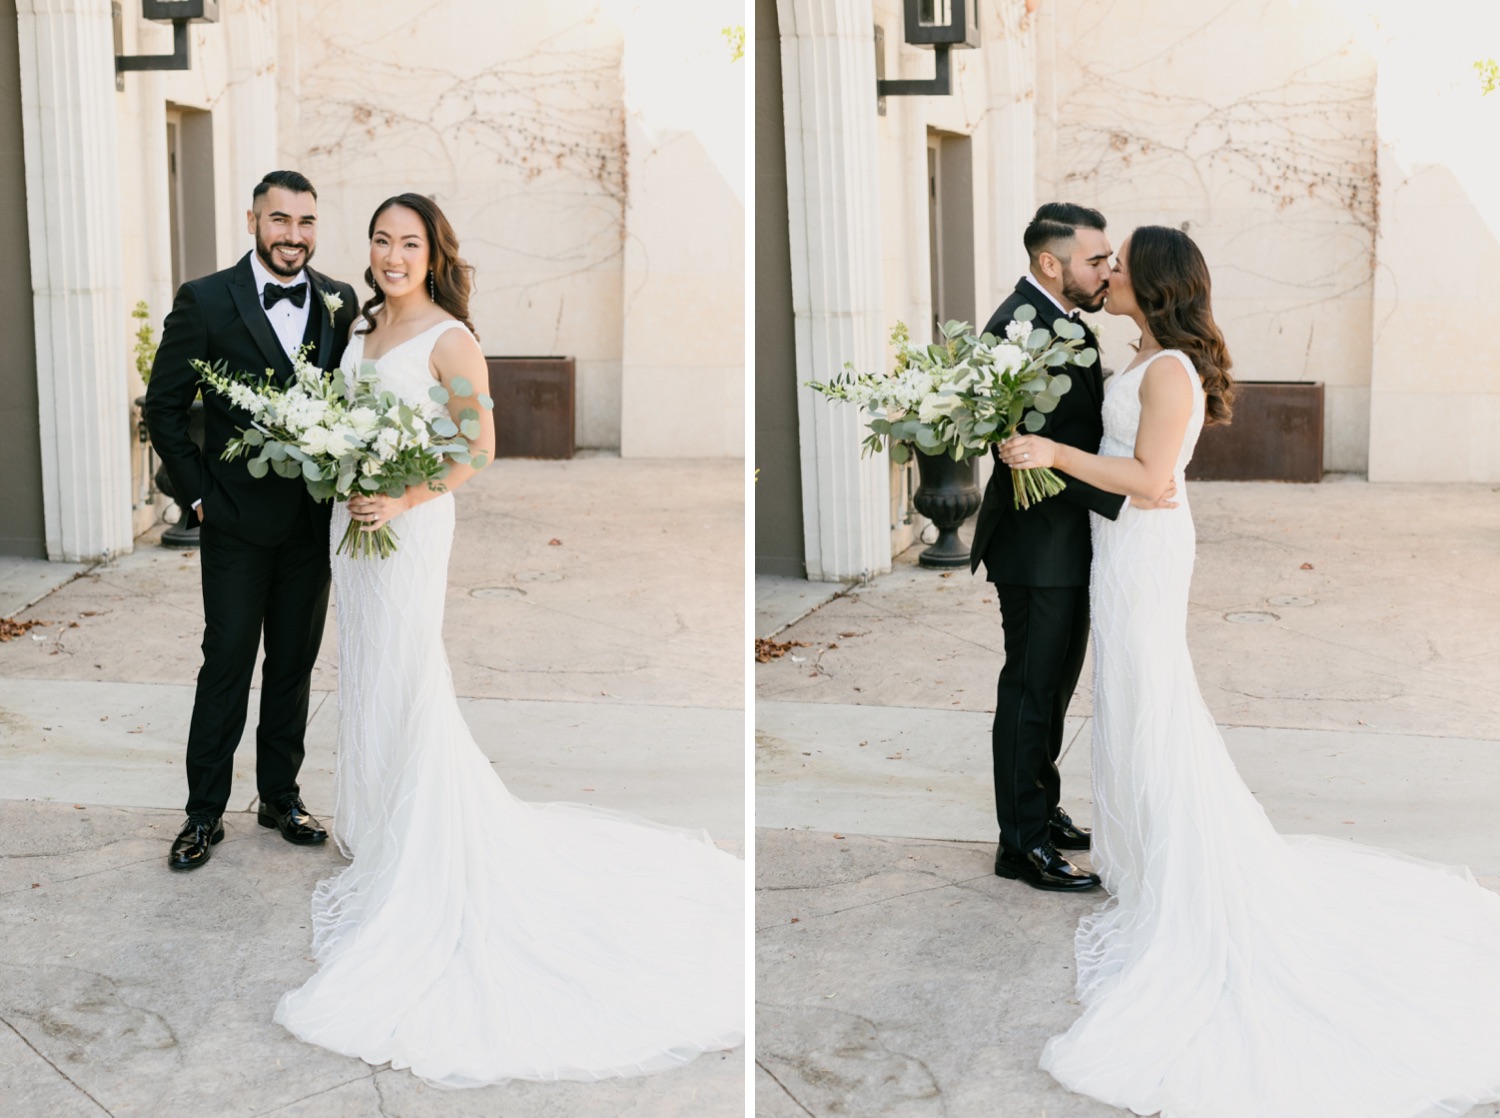 Bride and Groom portraits at Tooth and nail winery wedding